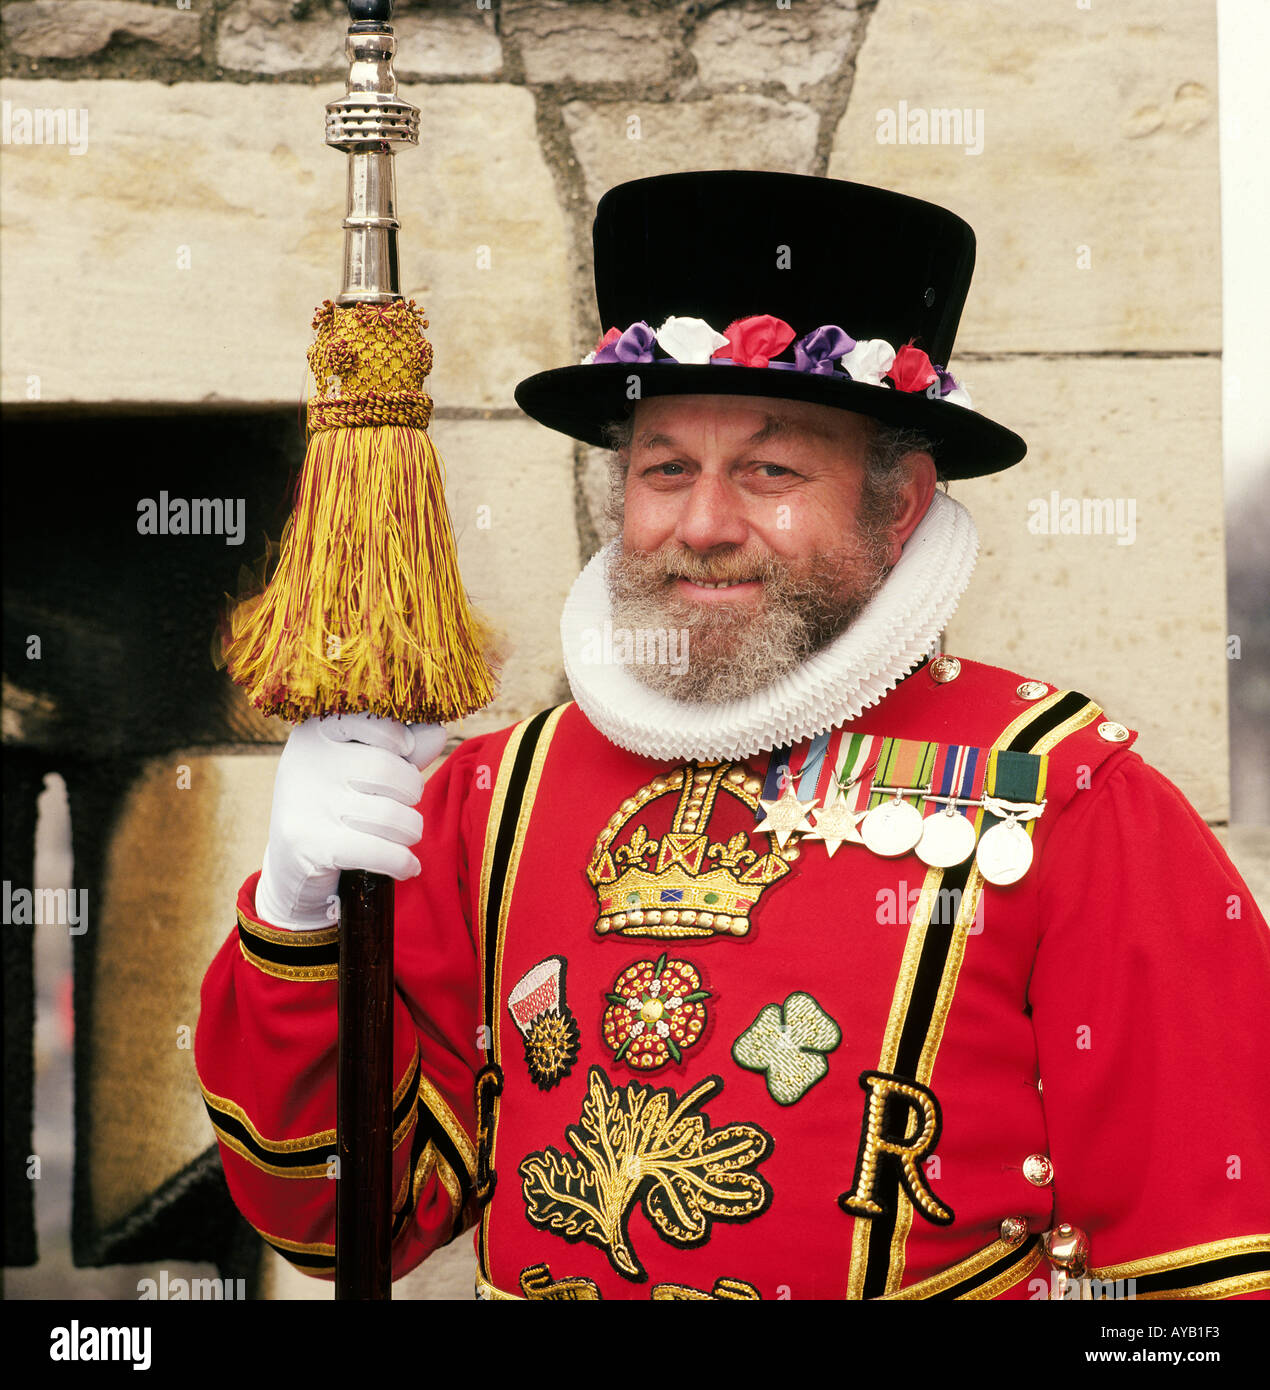 Beefeater at the Tower of London London UK Stock Photo